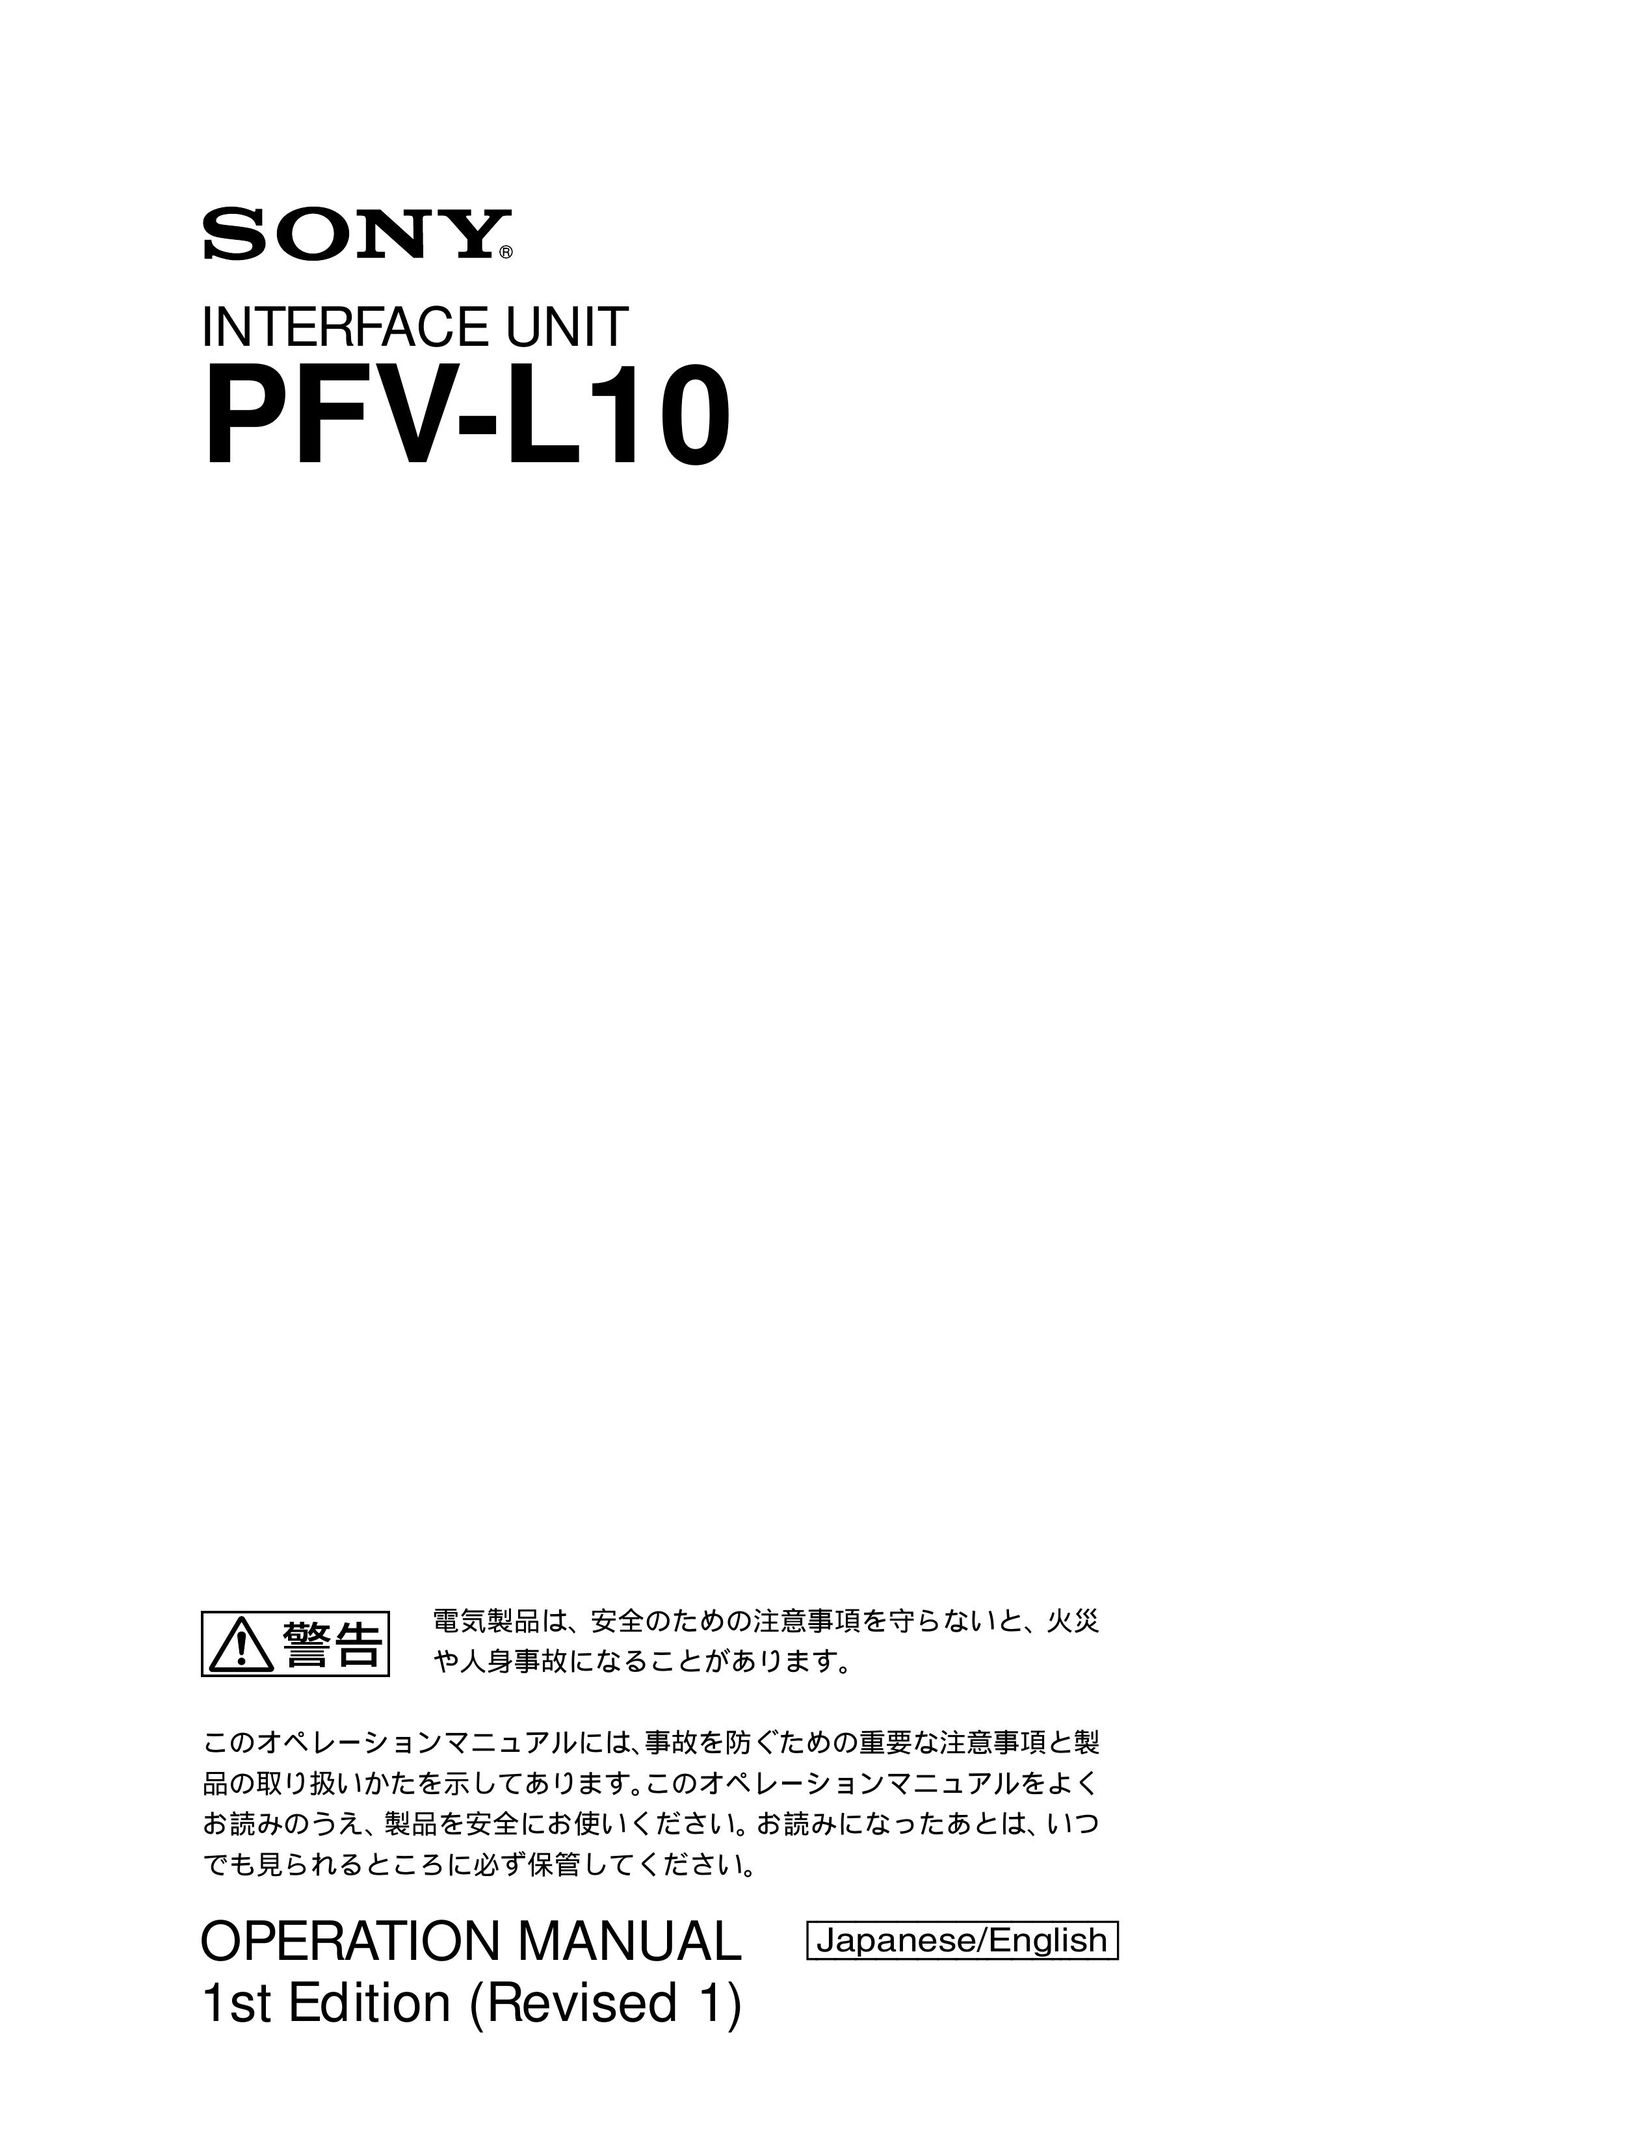 Sony PFV-L10 Network Router User Manual